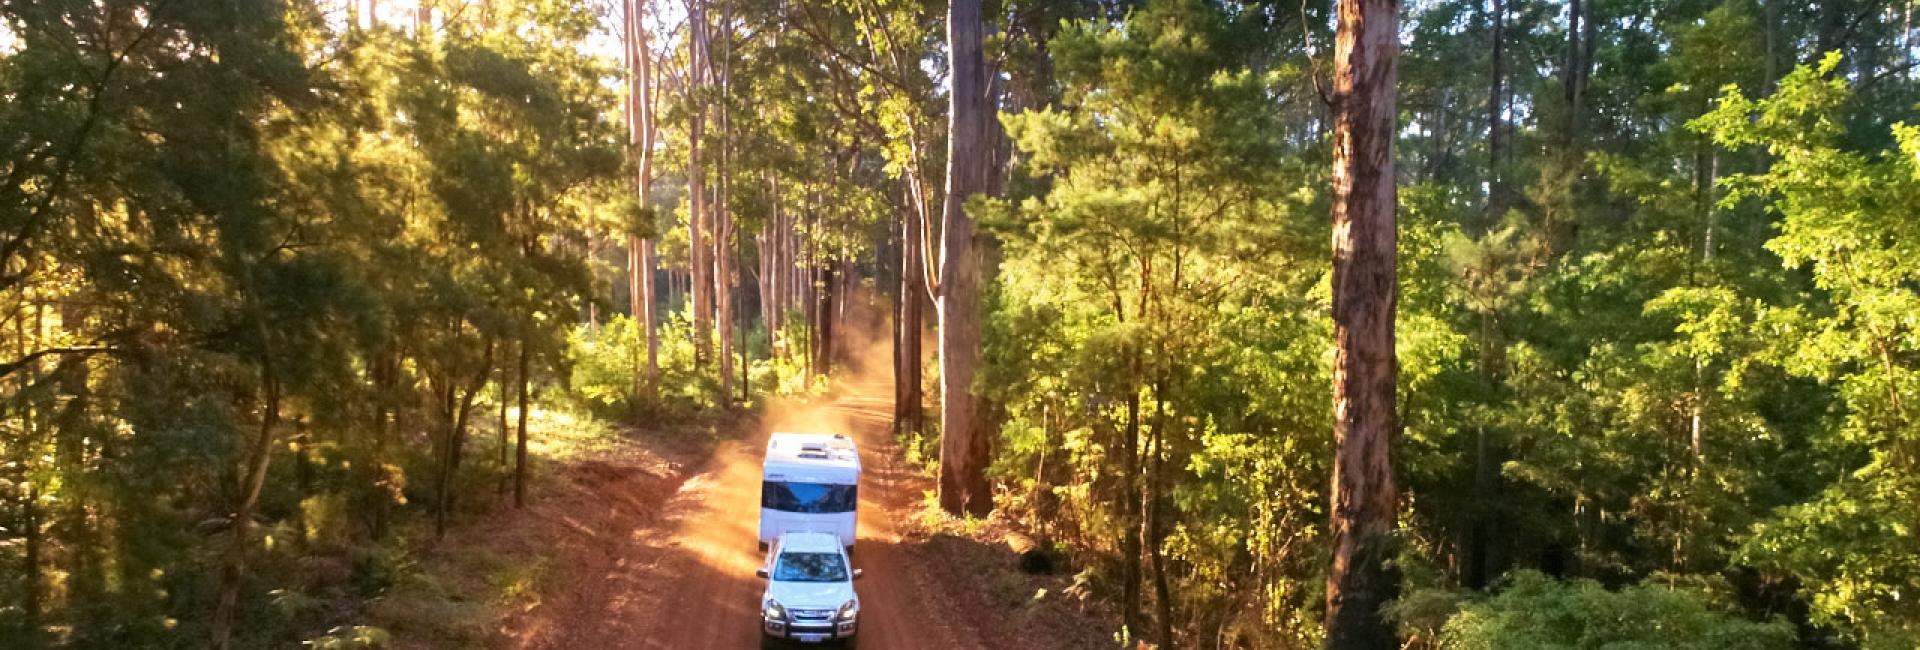 A car with a campervan drives on a dirt road in a green forest